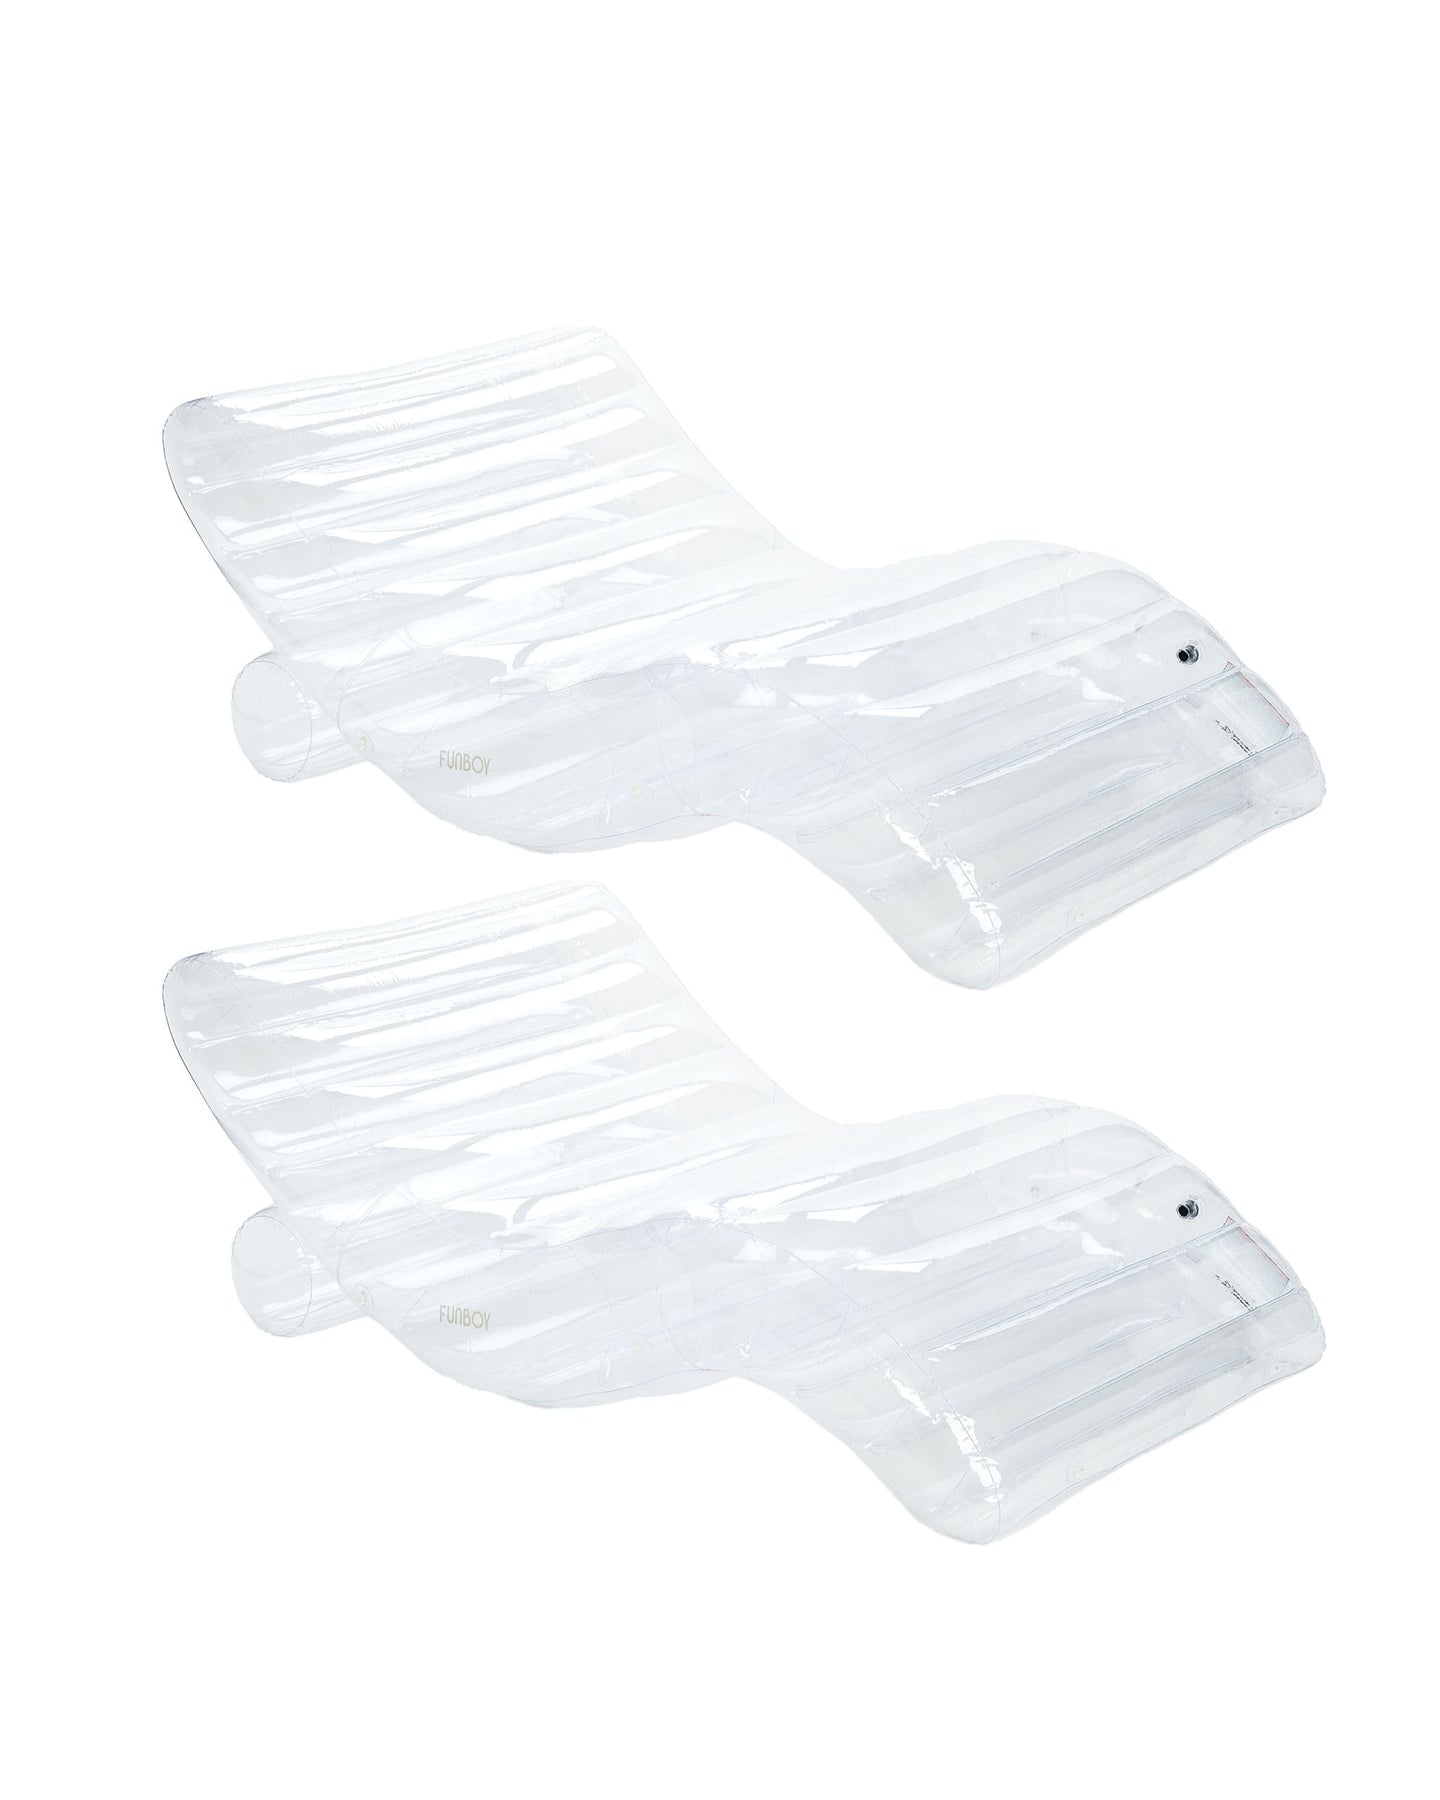 Super Clear Chaise Lounger Pool Float -2 Pack